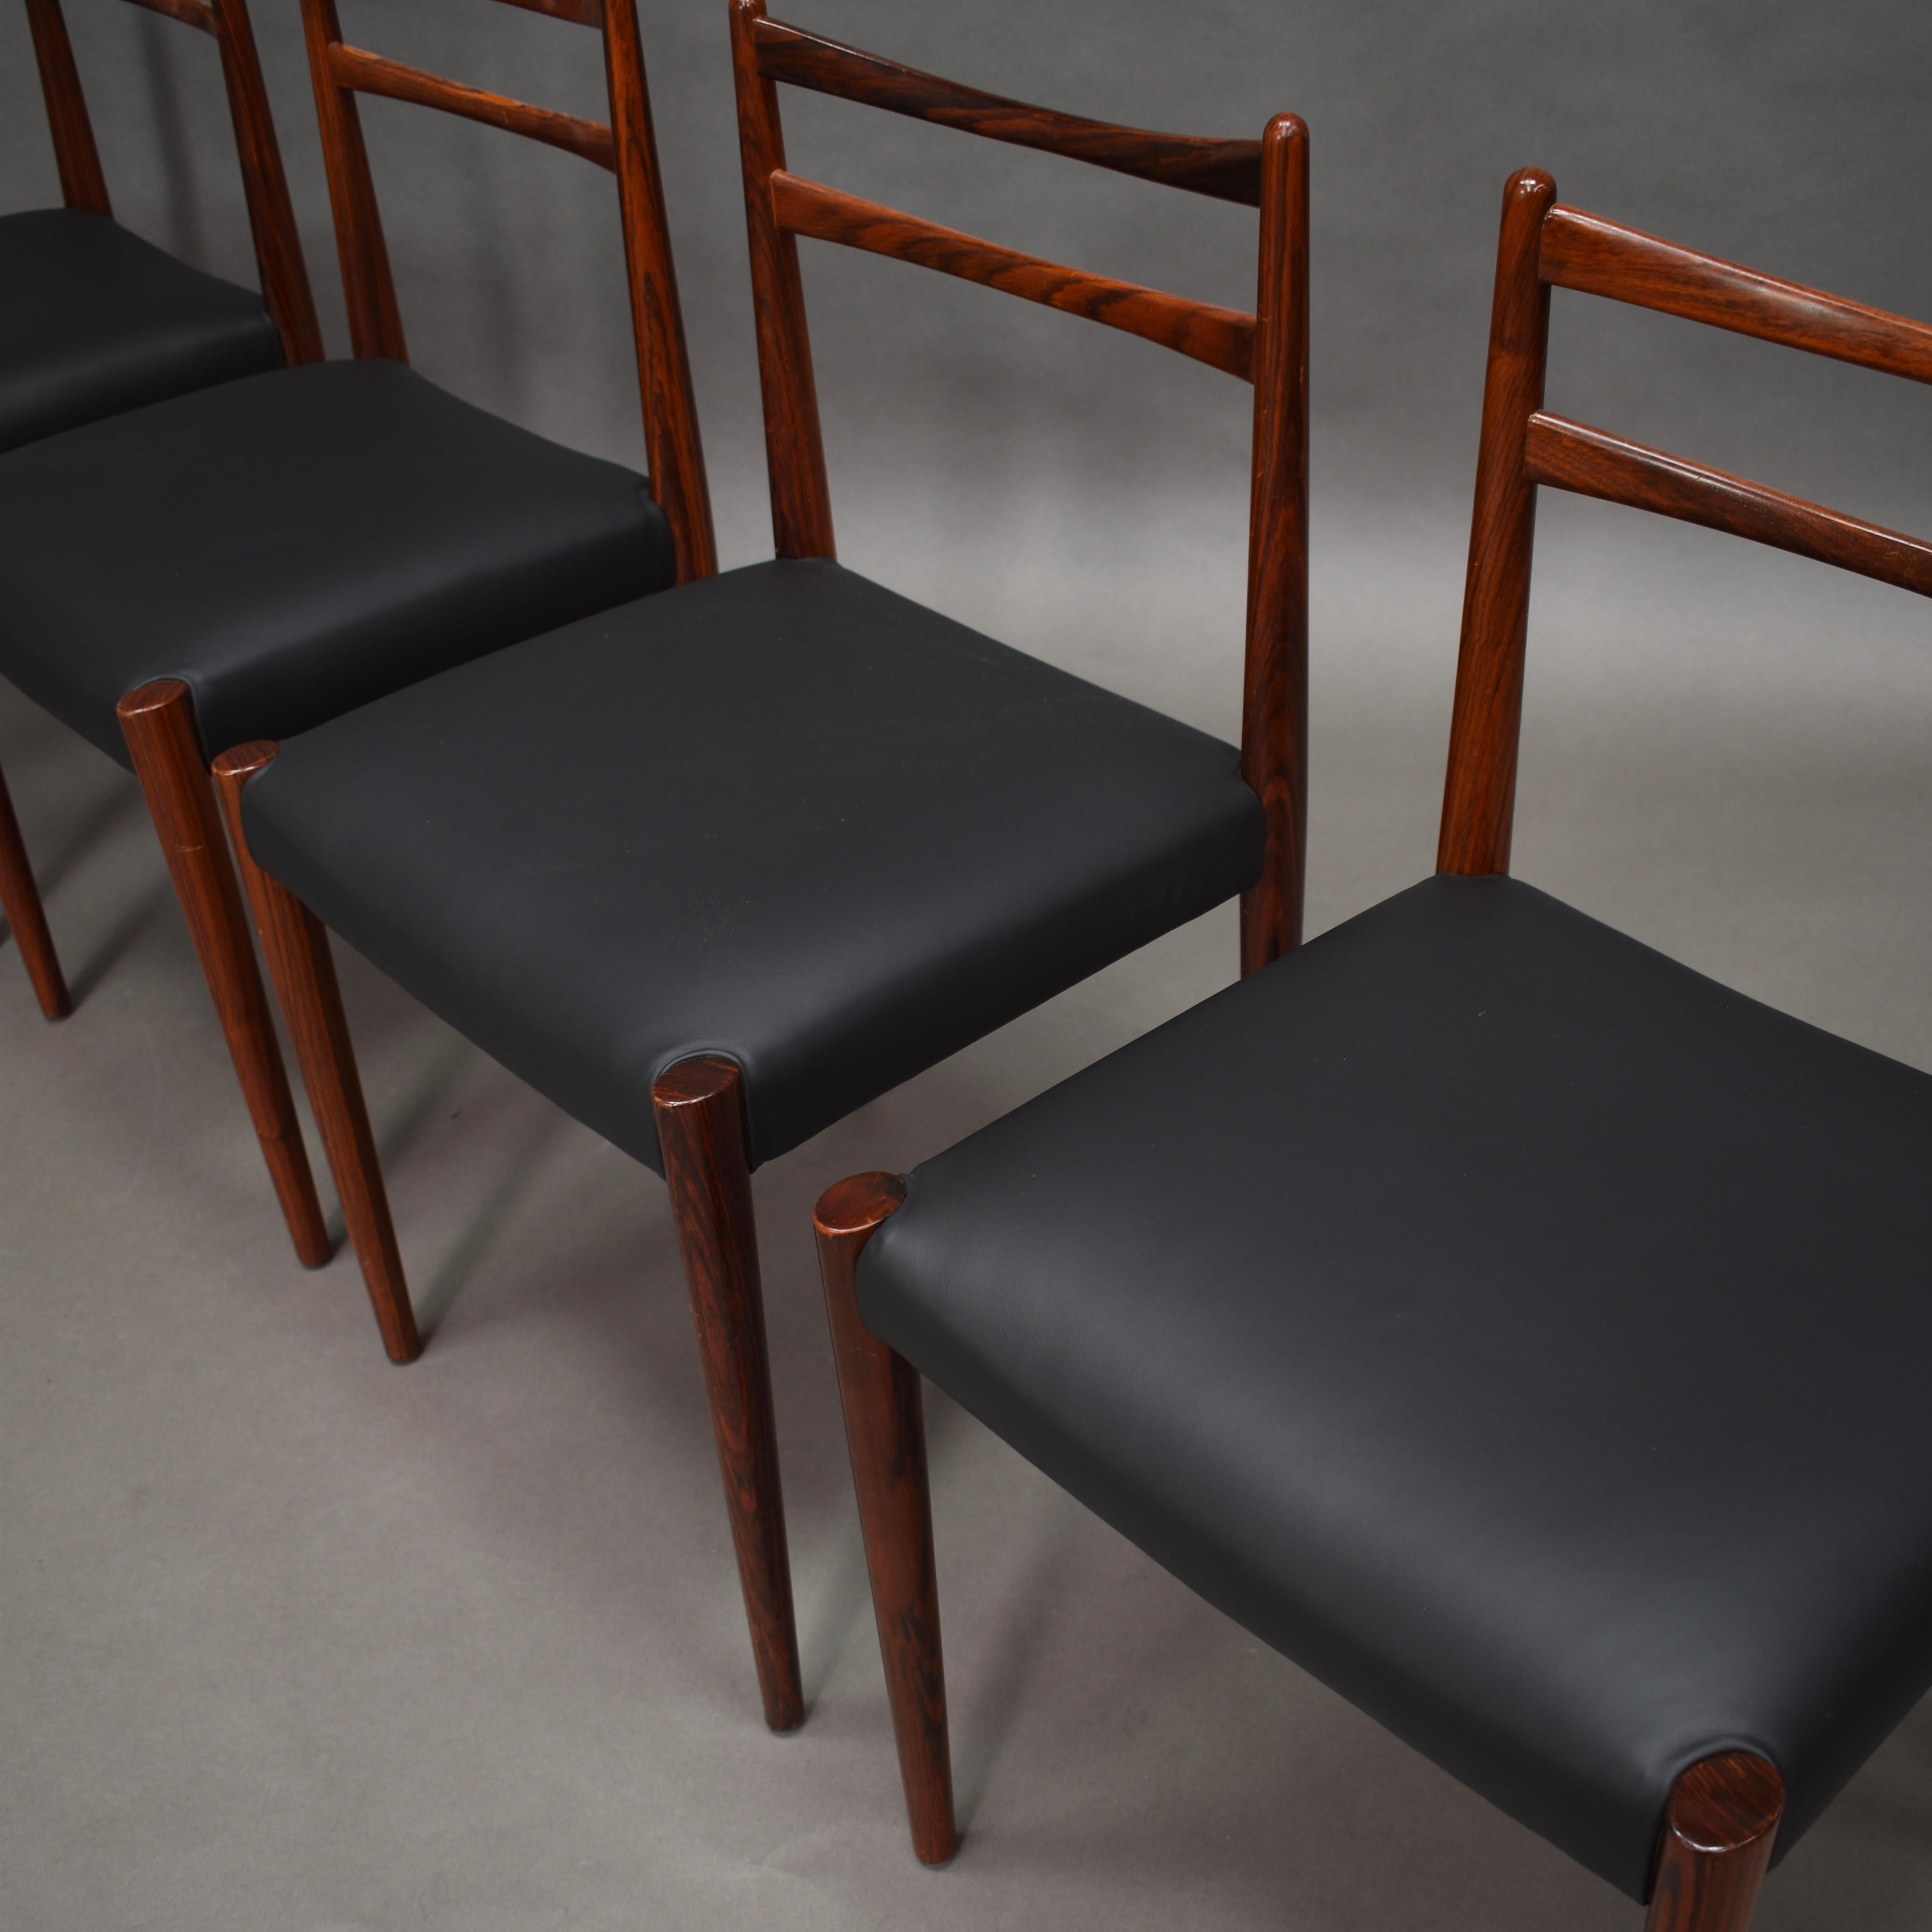 Danish Brazilian Rosewood Dining Chairs in New Black Leather, Denmark, 1950s 10